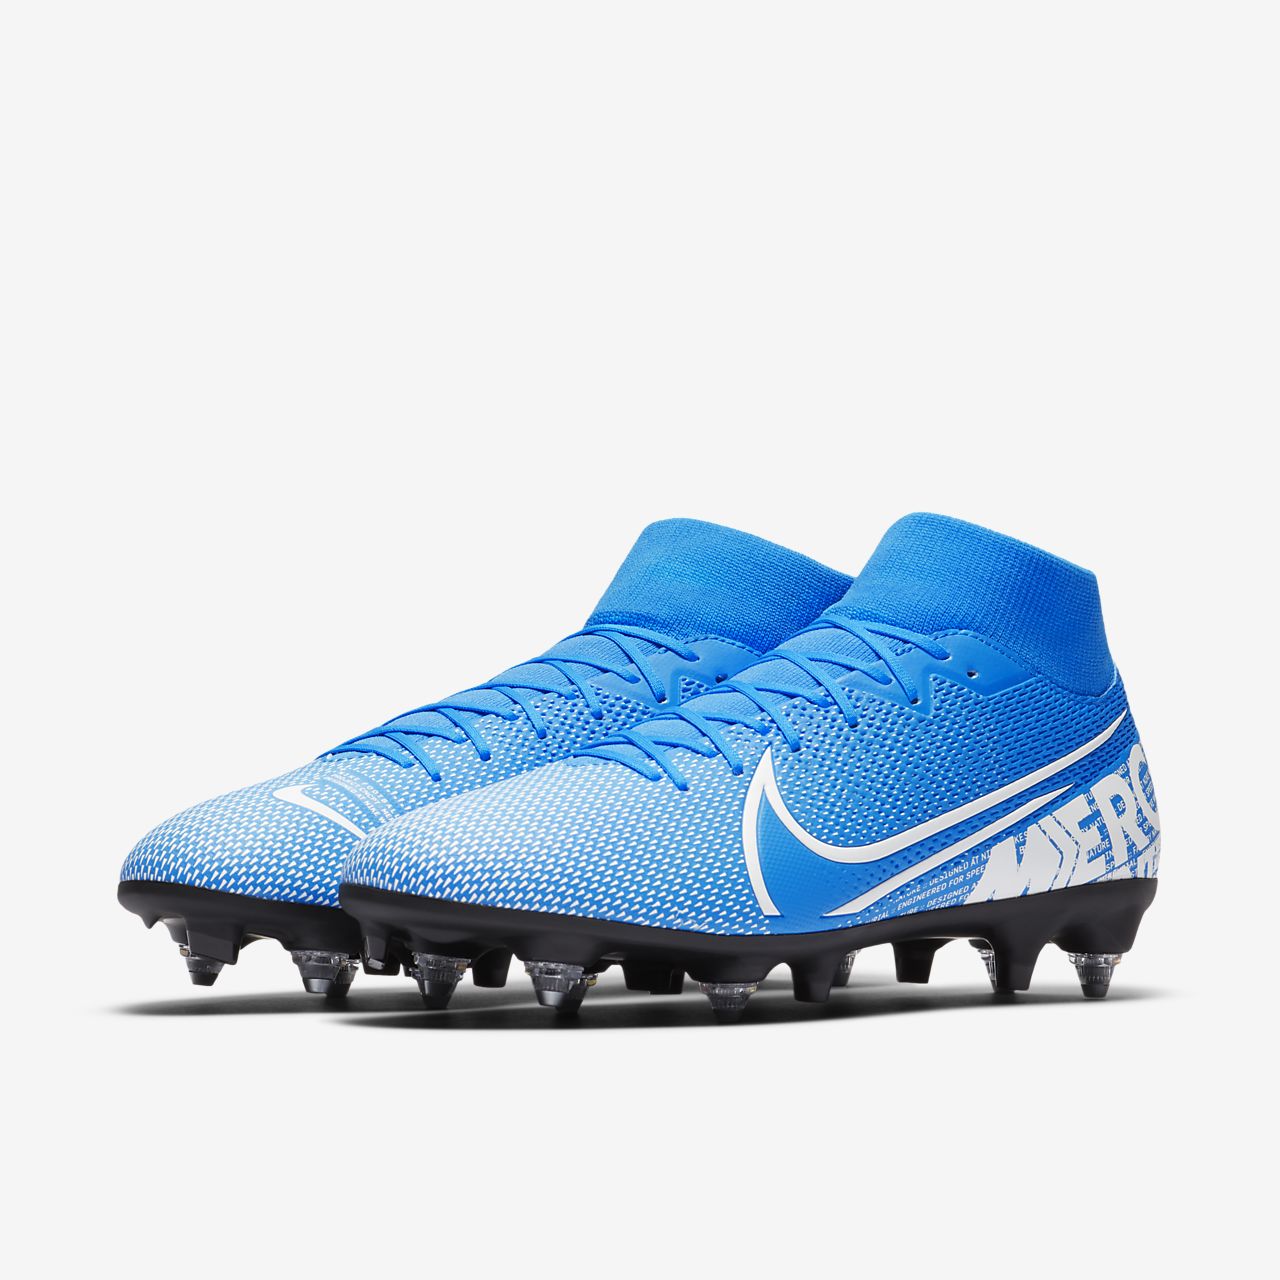 Nike Mercurial Superfly 7 Academy MDS TF Football Shoes.